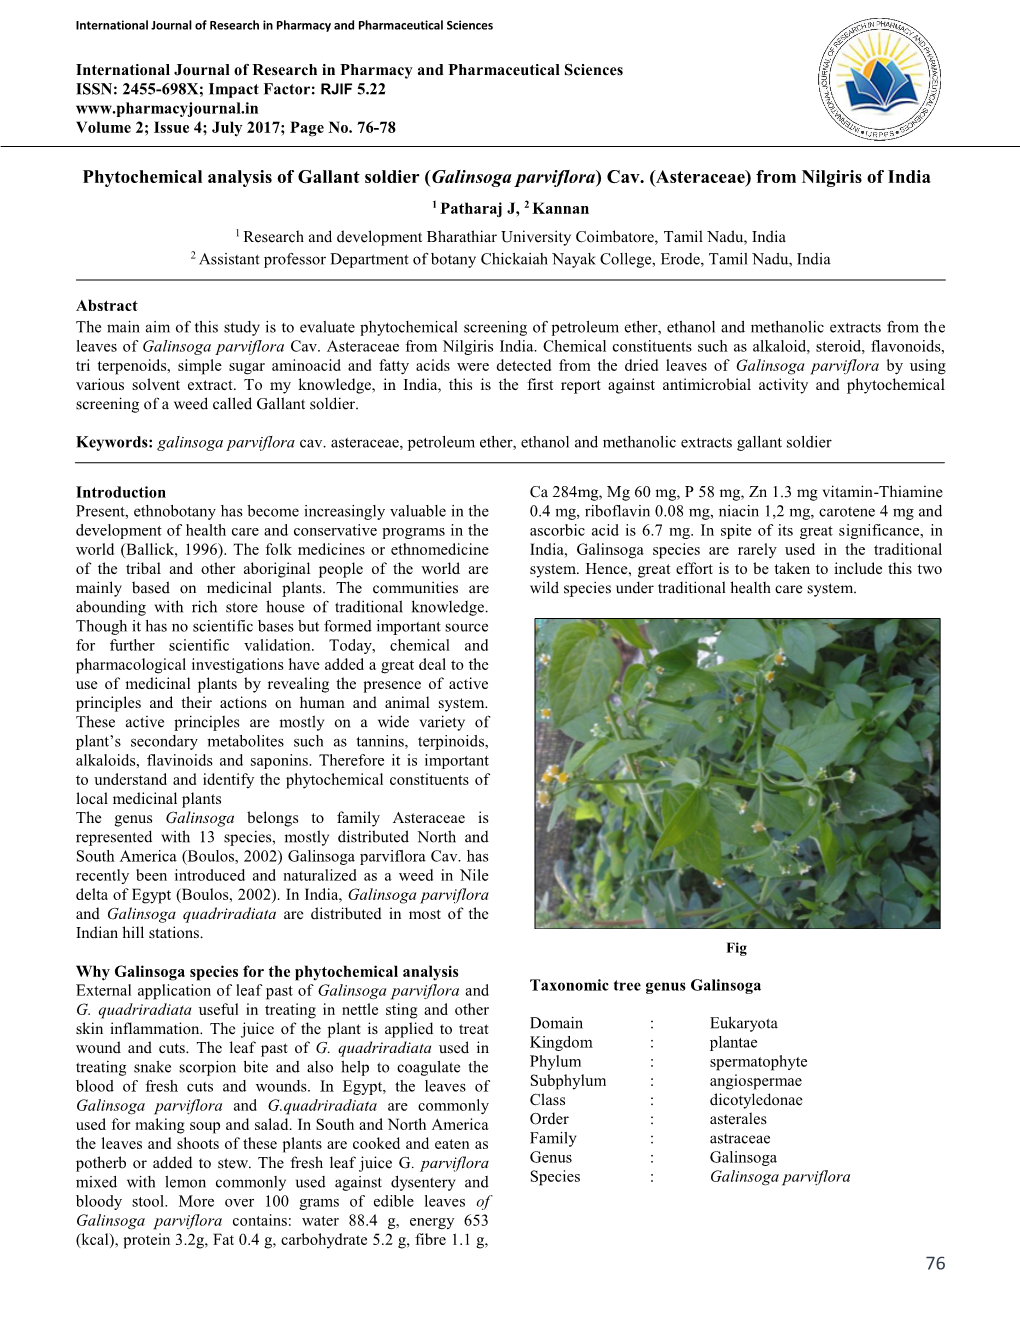 Phytochemical Analysis of Gallant Soldier (Galinsoga Parviflora) Cav